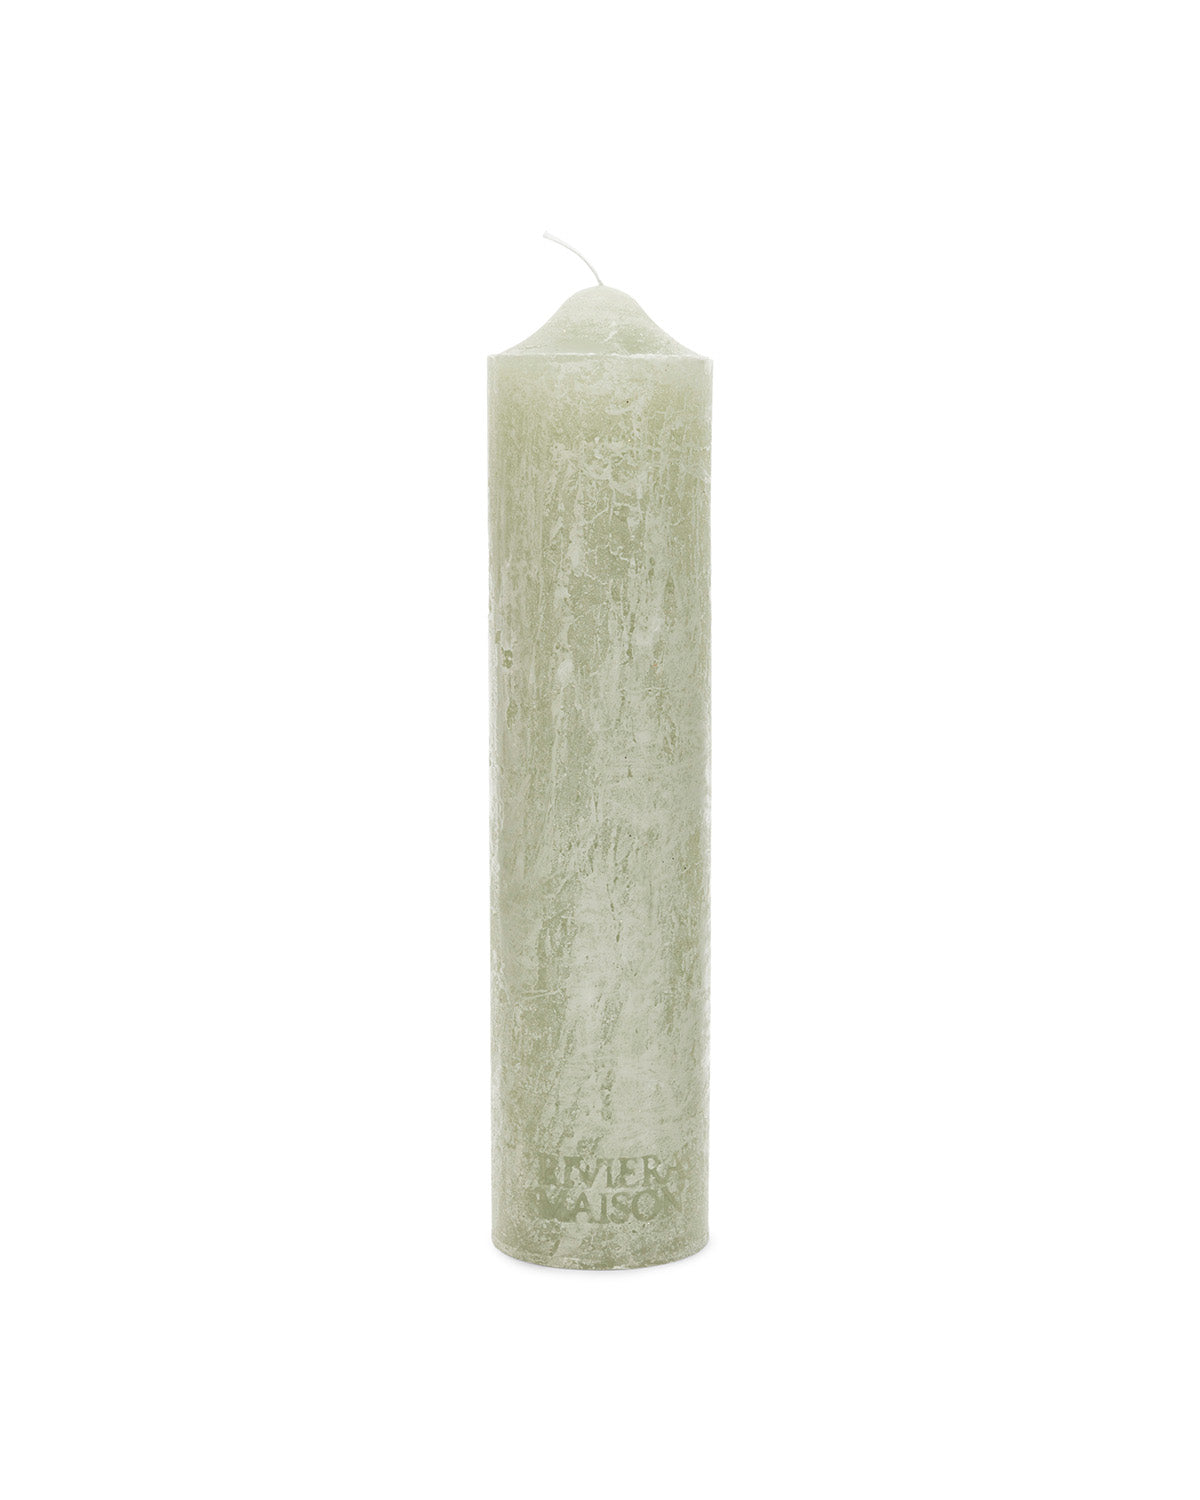 CANDLE MINT GREEN by Riviera Maison